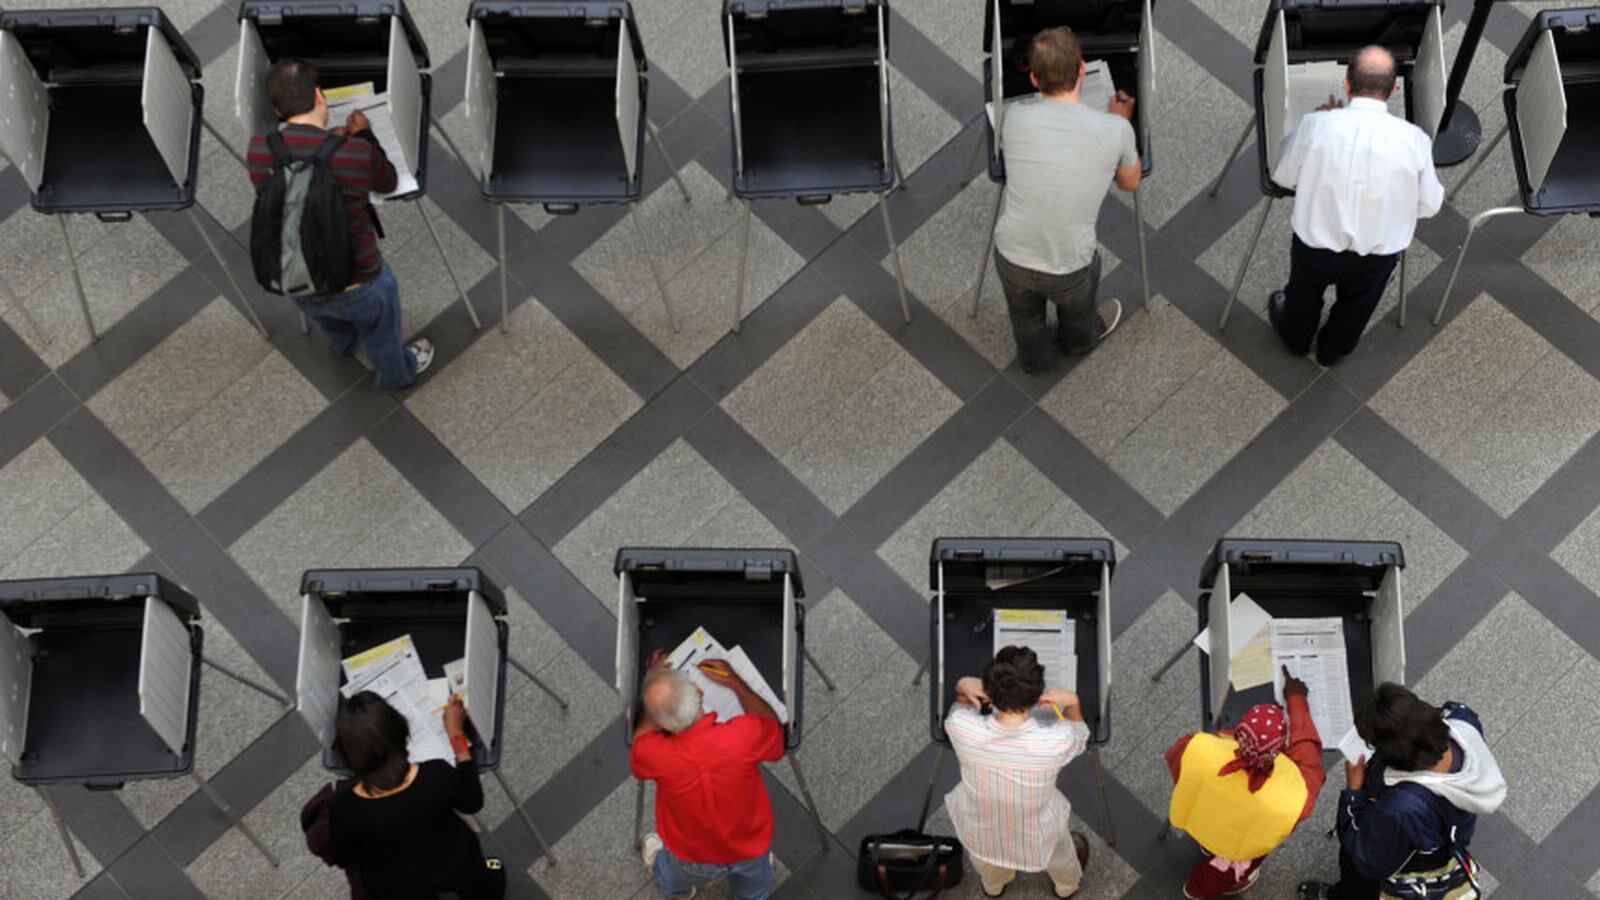 Denver voters fill out their ballot at the Webb municipal building.